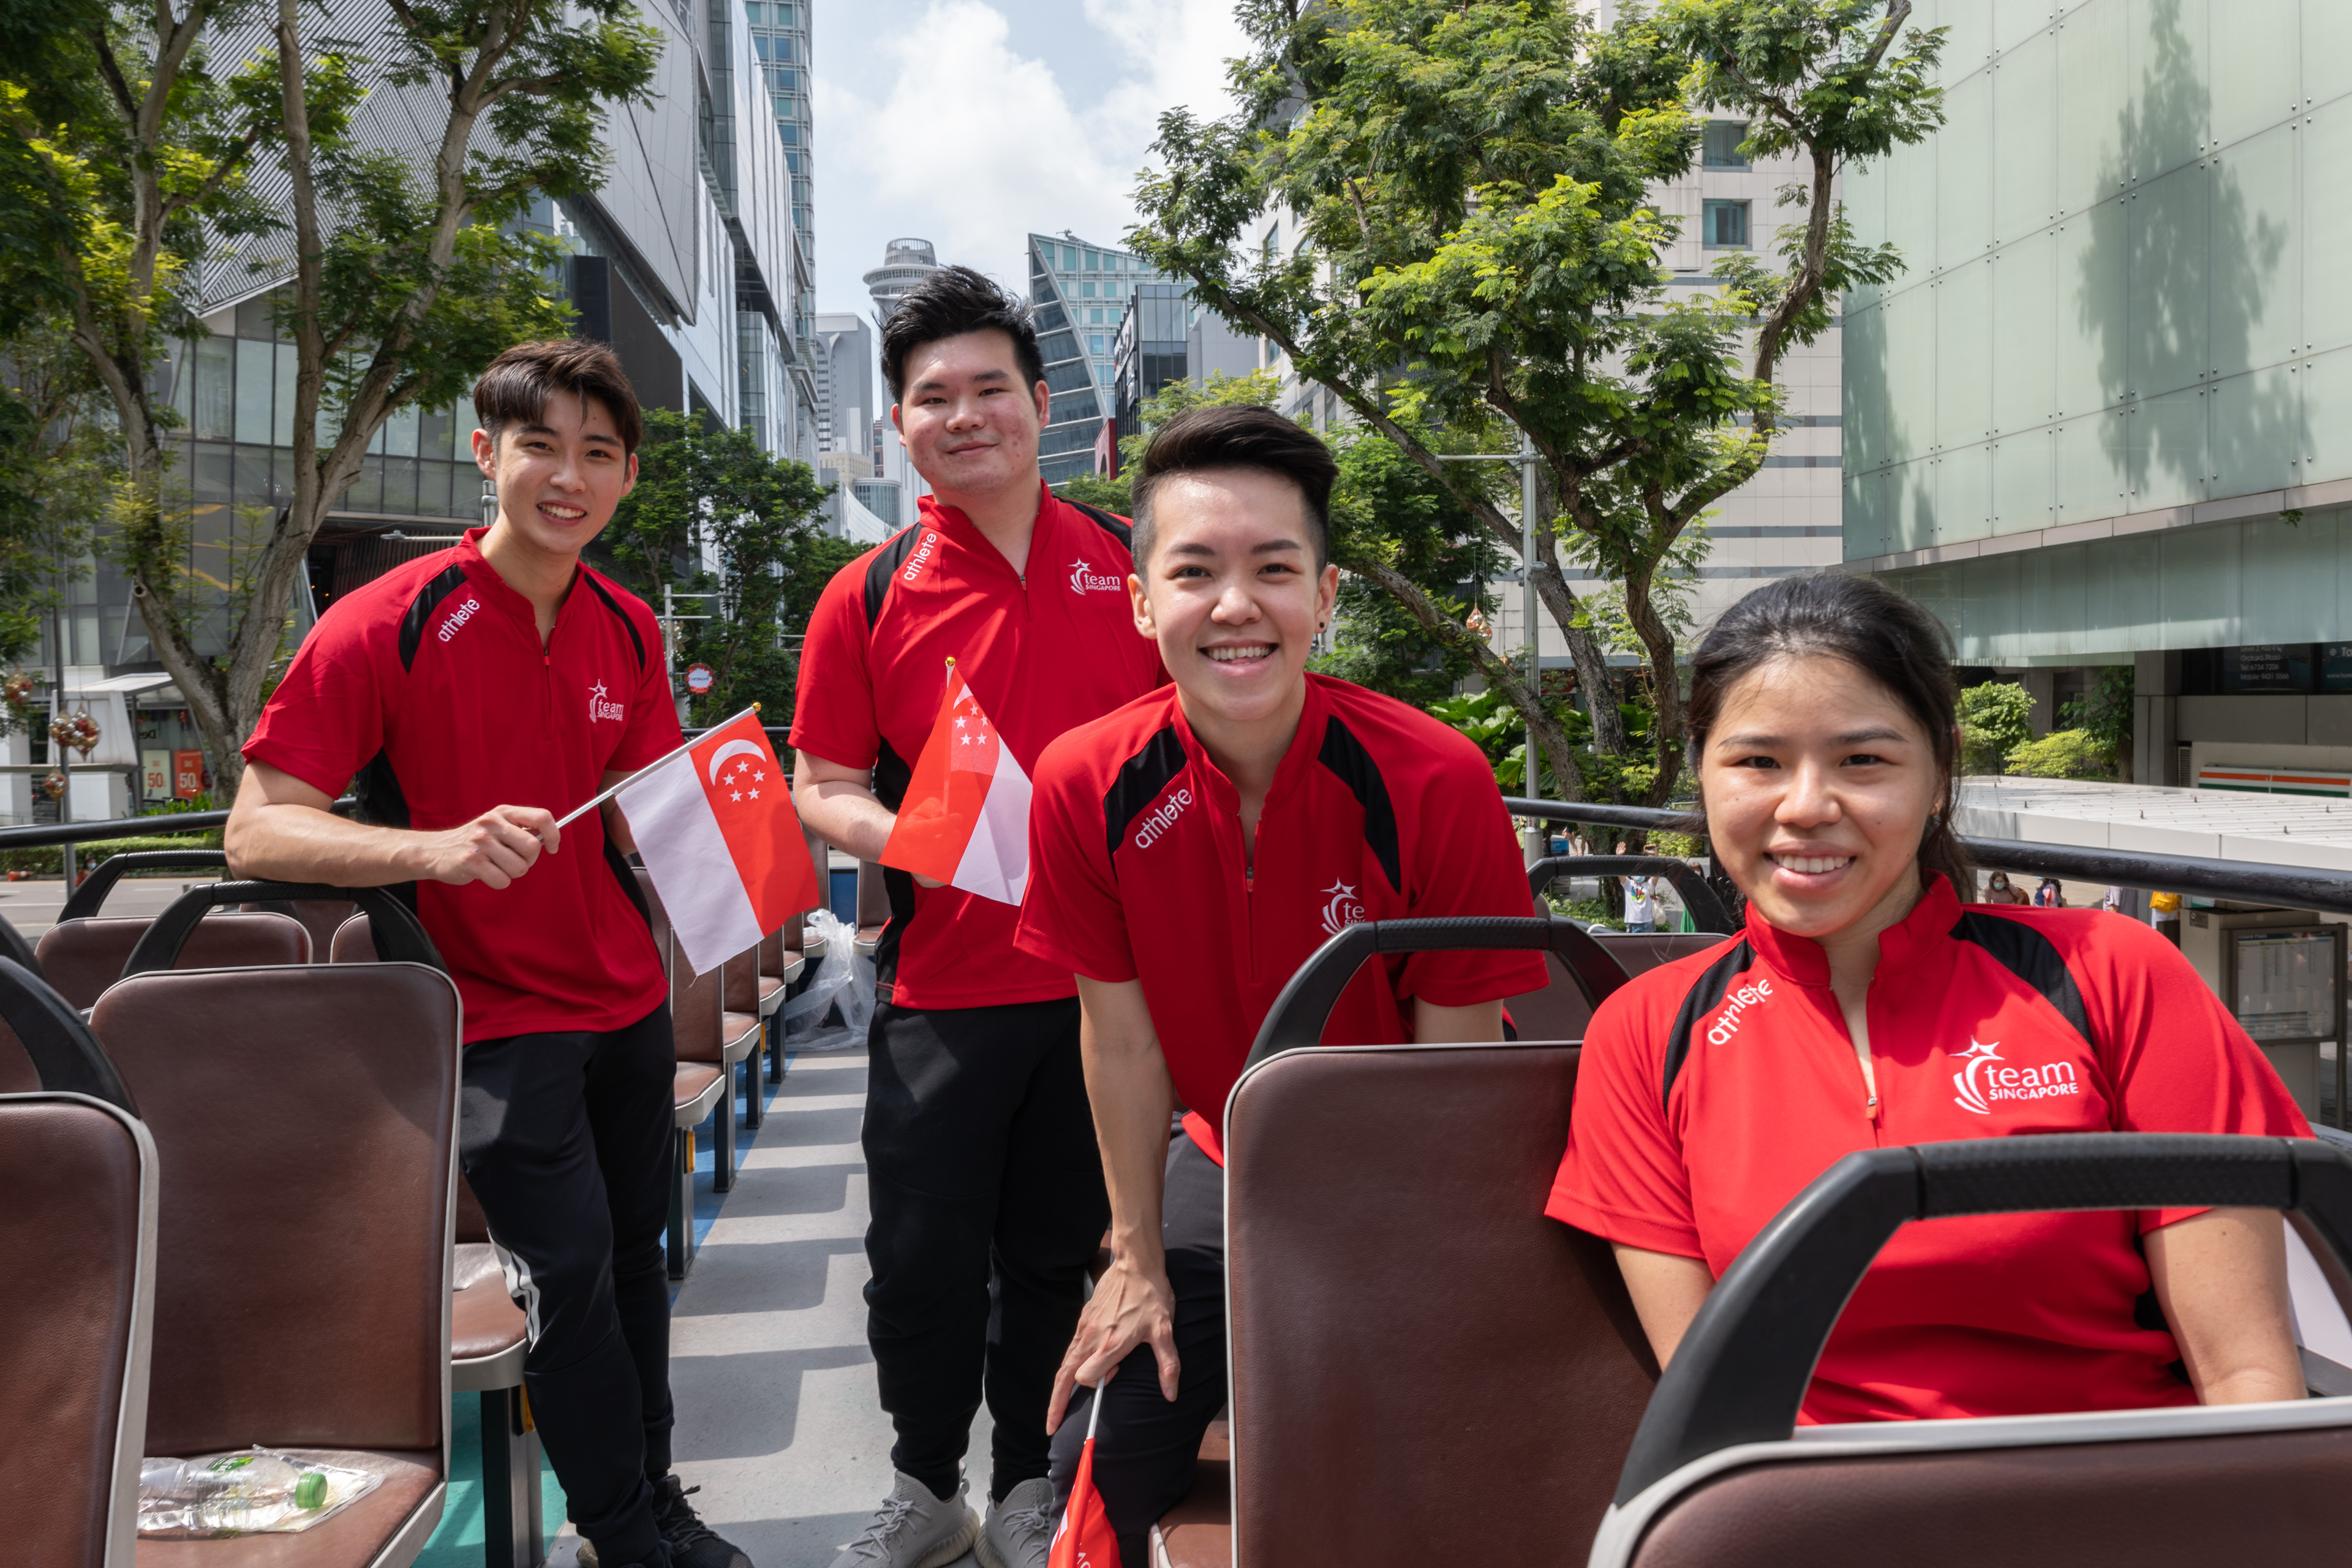 TeamSG's Top 4 headlining athletes in 2021, celebrate in open-top bus parade!